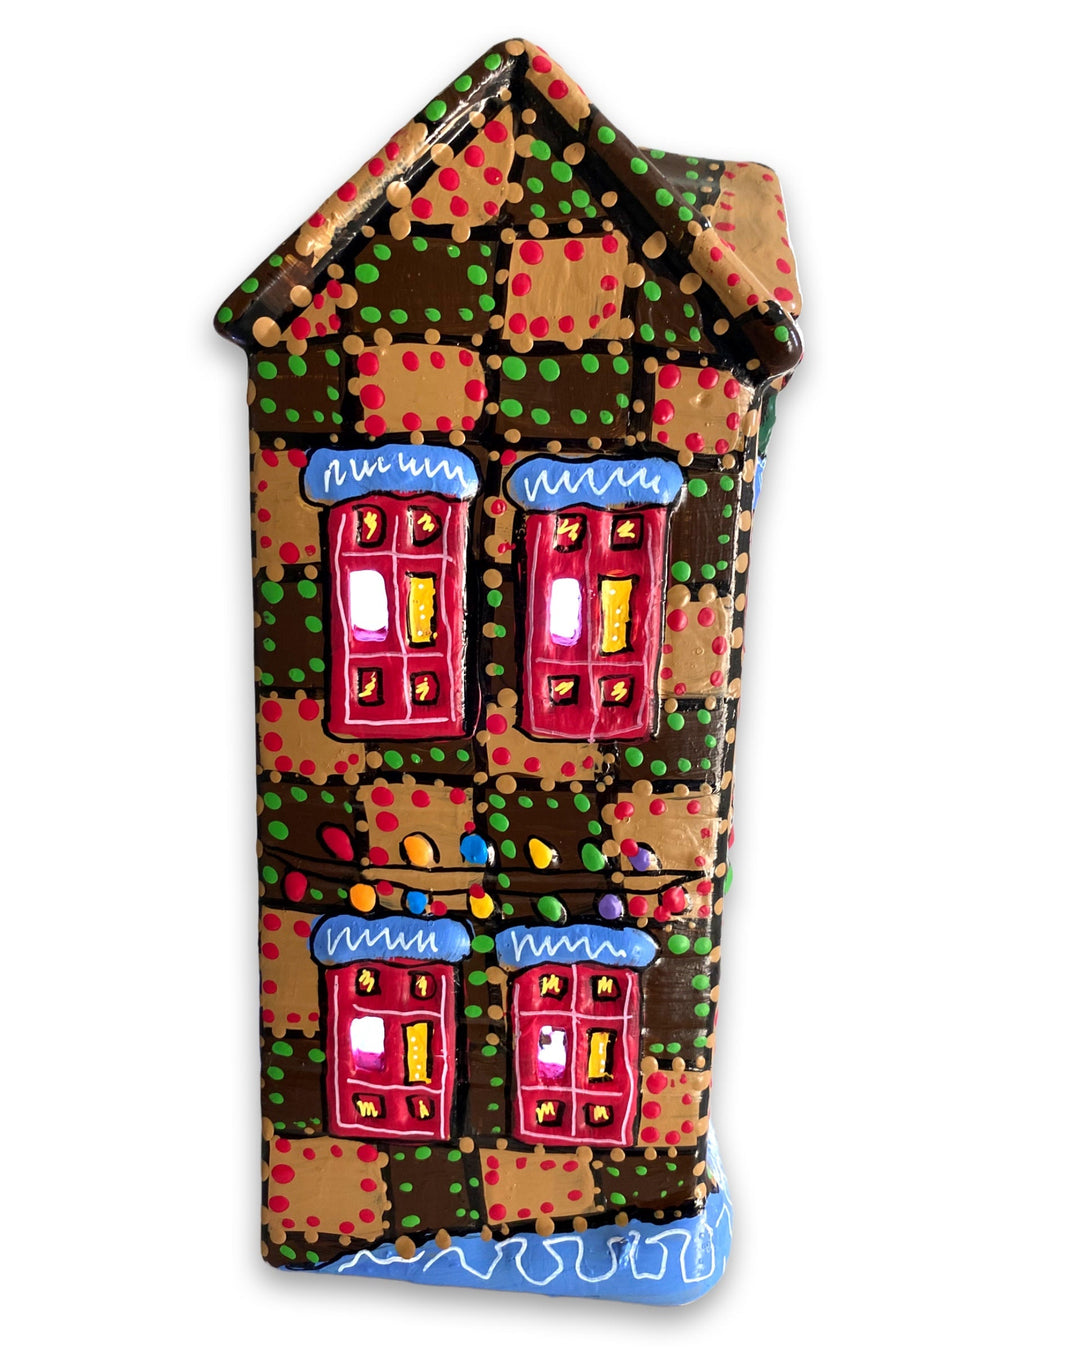 The Gallery Brown & Sand Edition Hand Painted Ceramic LED Christmas Village House - Heather Freitas 